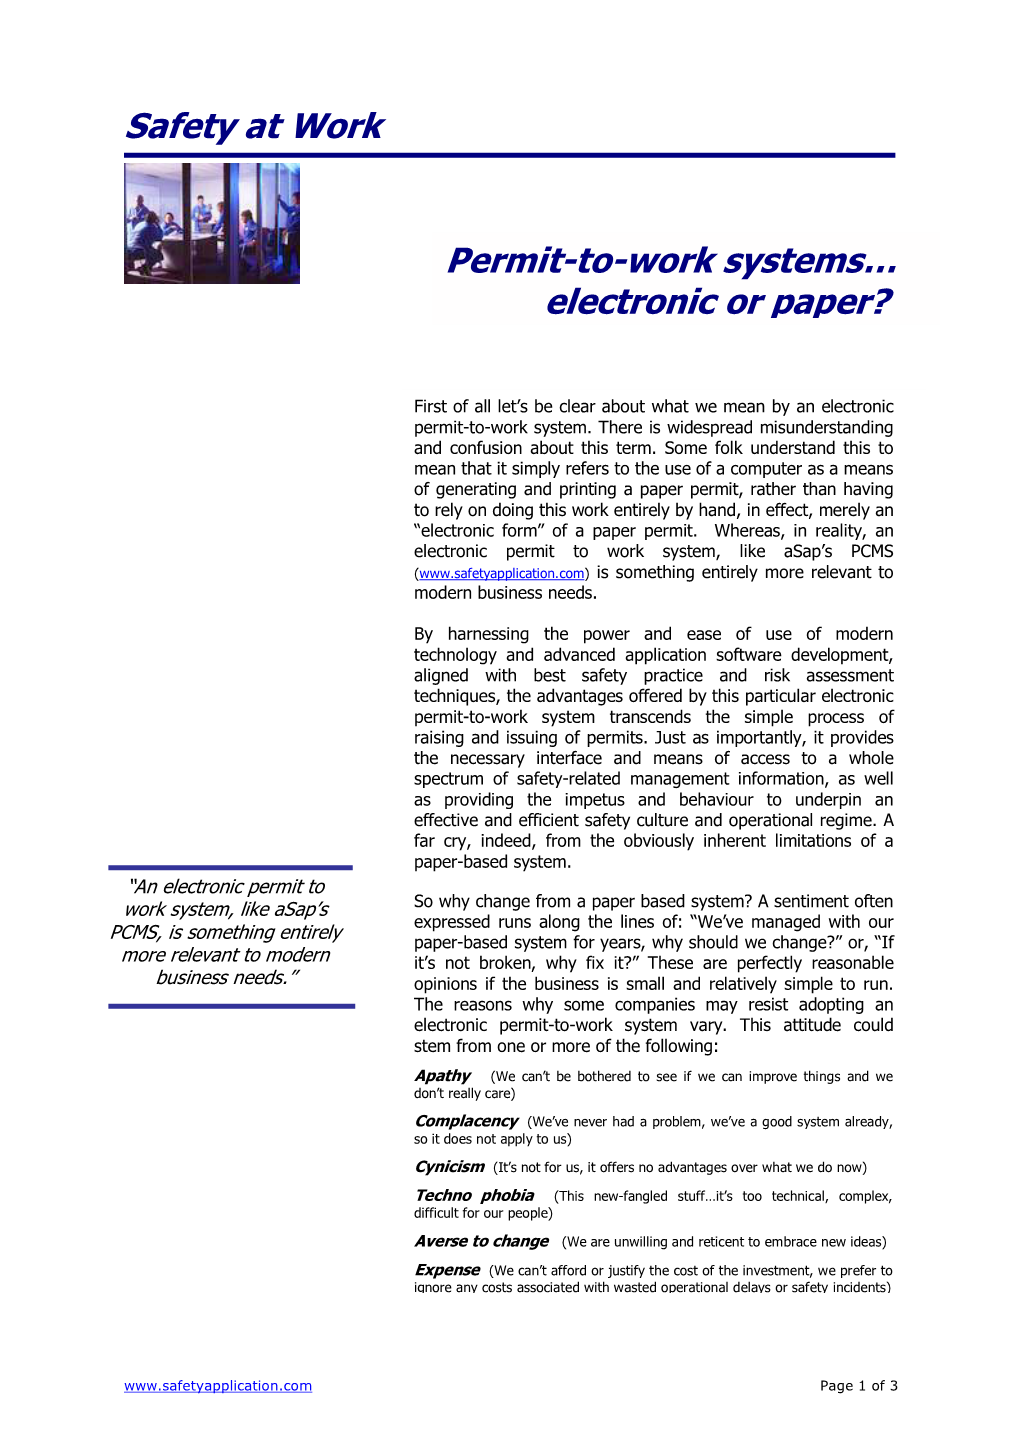 Safety at Work Permit-To-Work Systems… Electronic Or Paper?